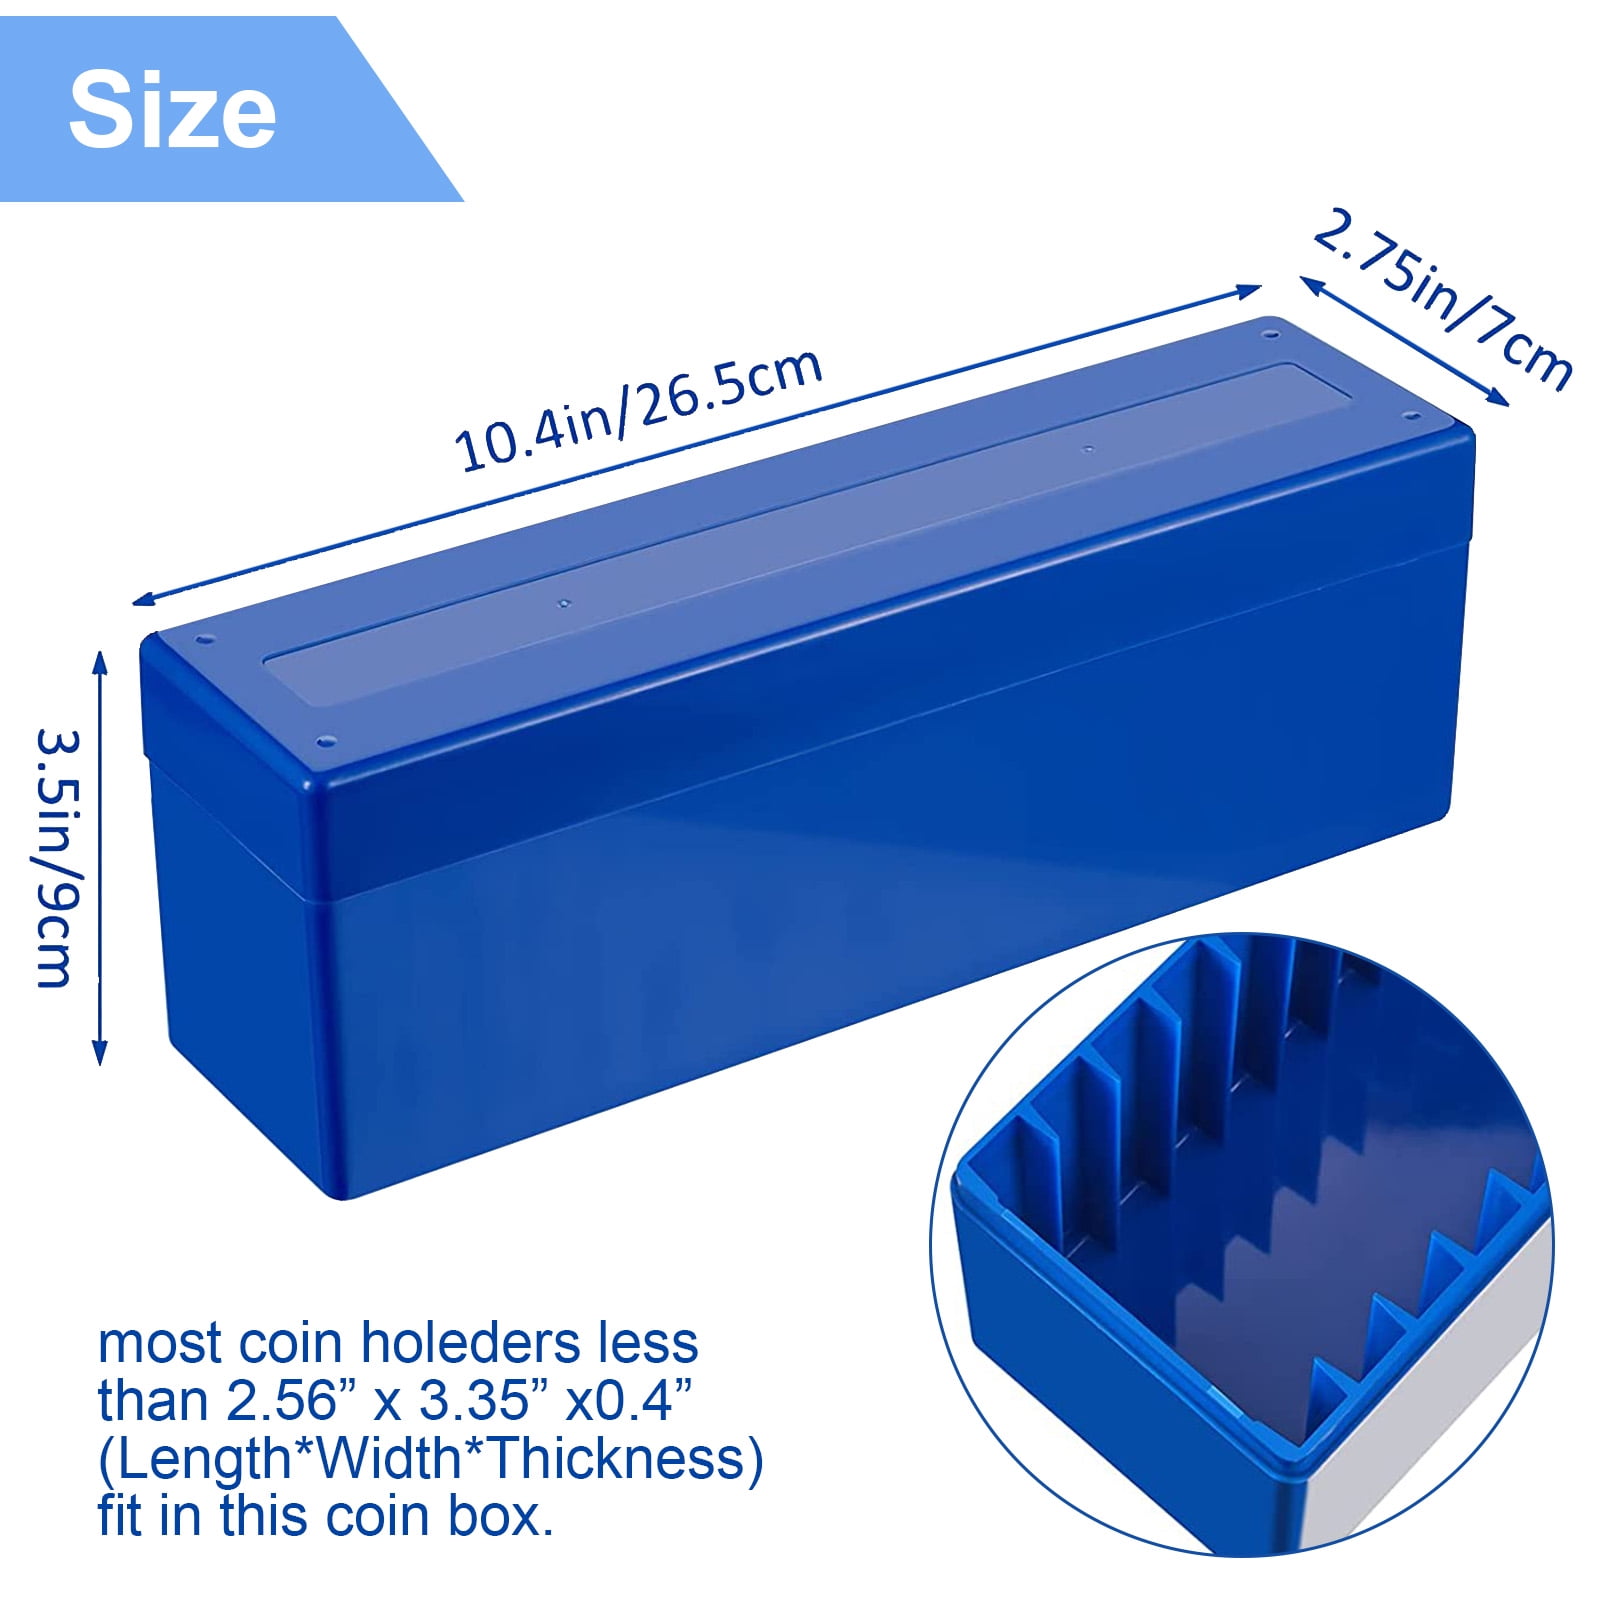 20 Coin Collection Storage Case, EEEkit 17~40mm Plastic Coin 